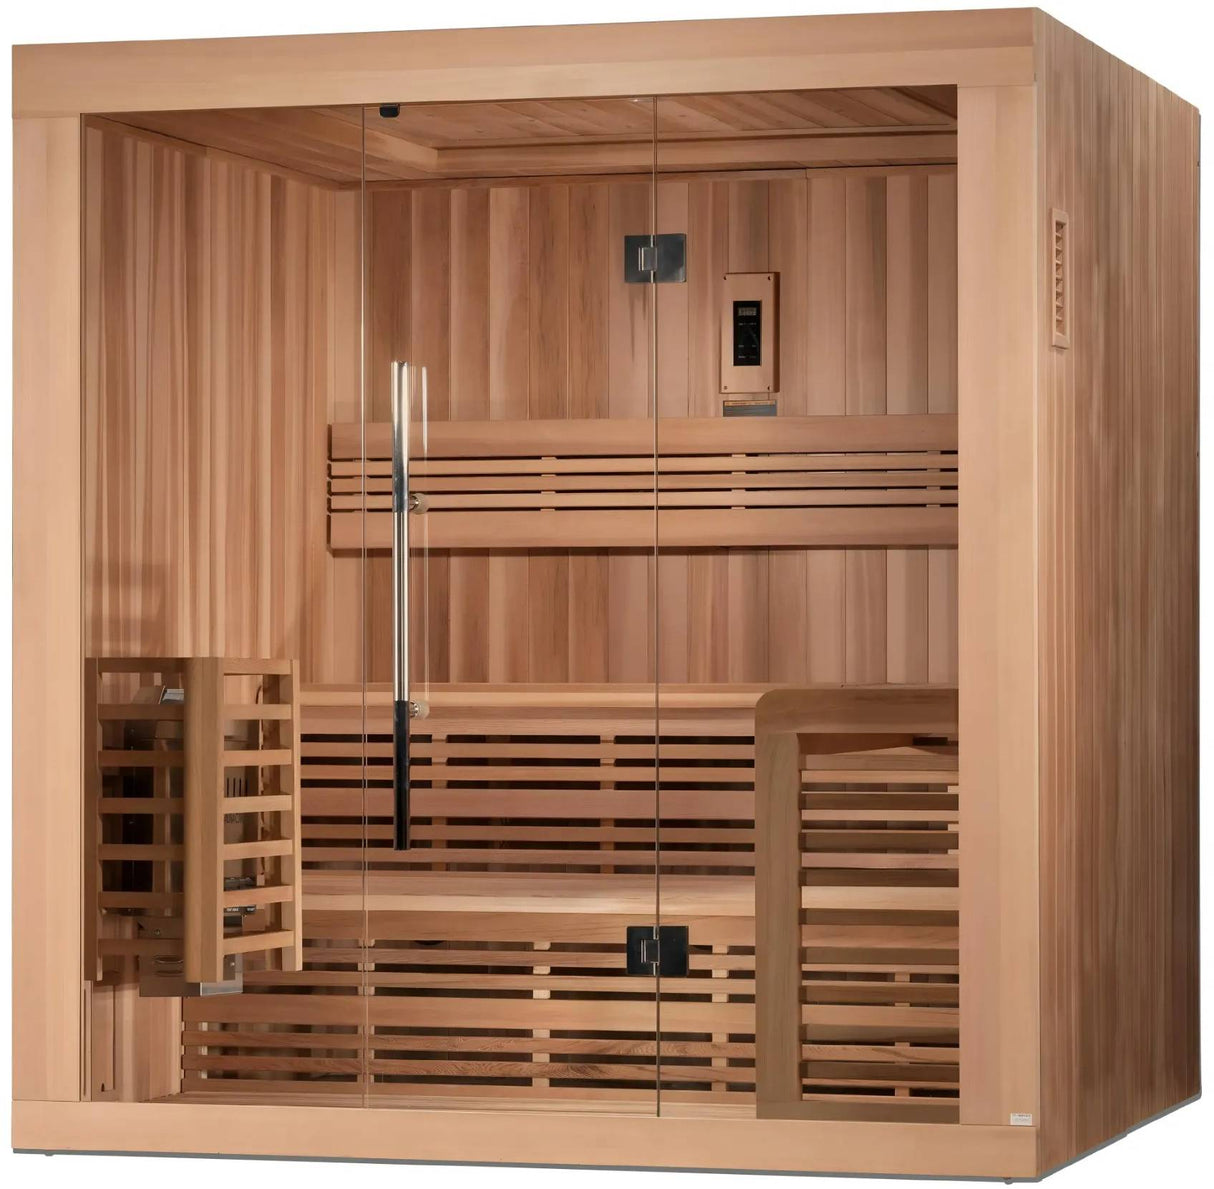 ZiahCare's Golden Designs Osla 6 Person Traditional Sauna Mockup Image 5